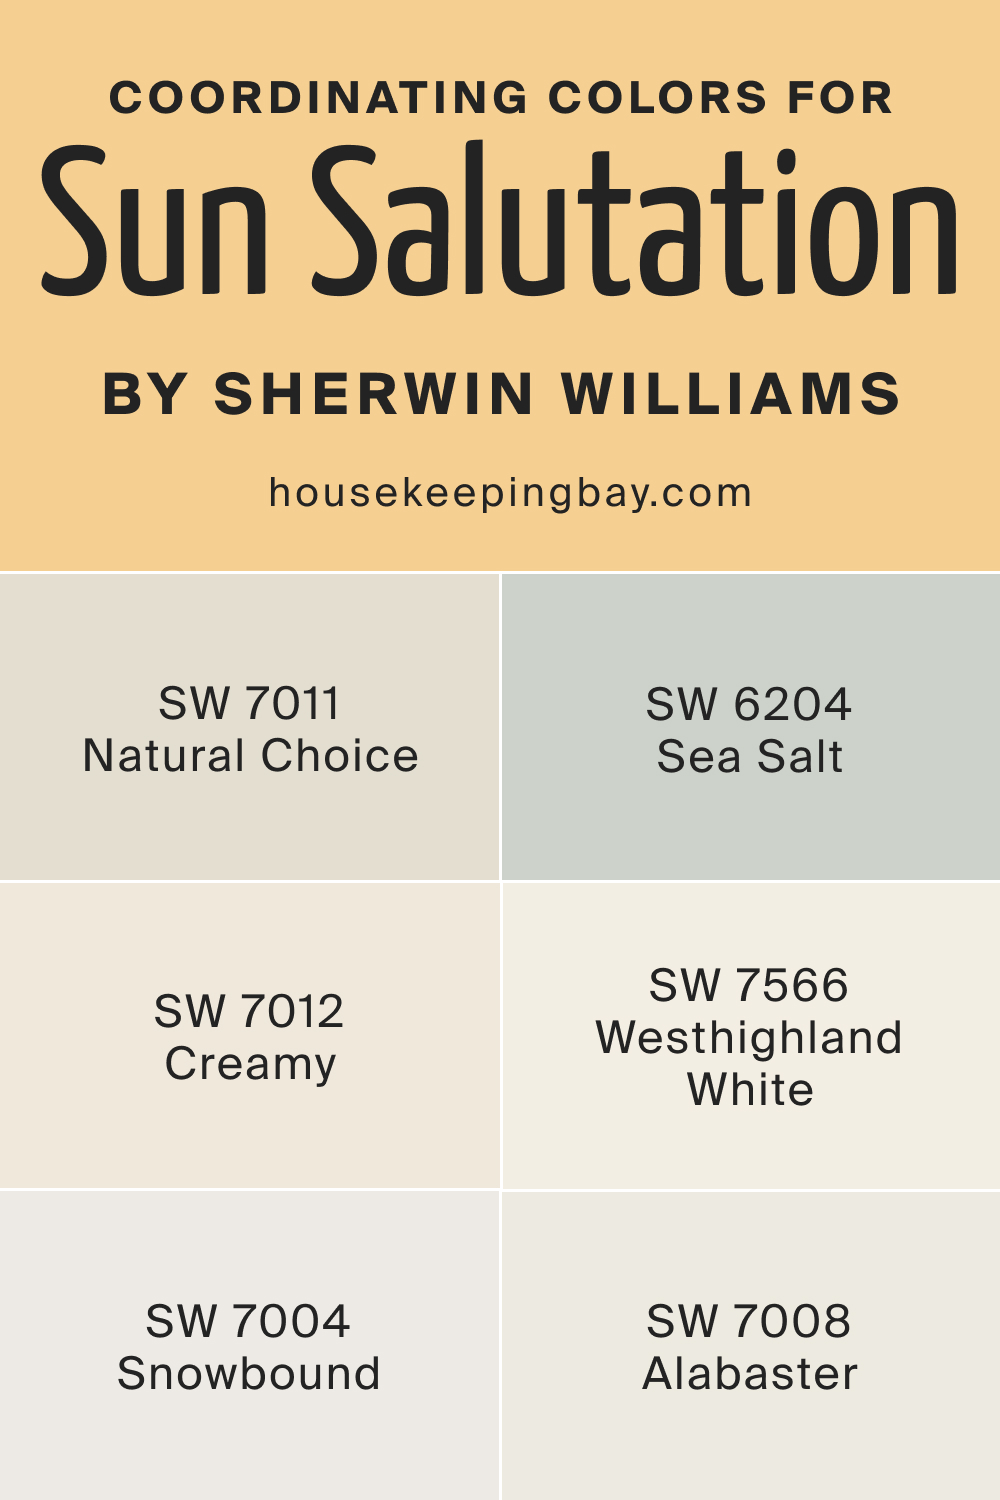 Coordinating Colors for Sun Salutation SW 9664 by Sherwin Williams